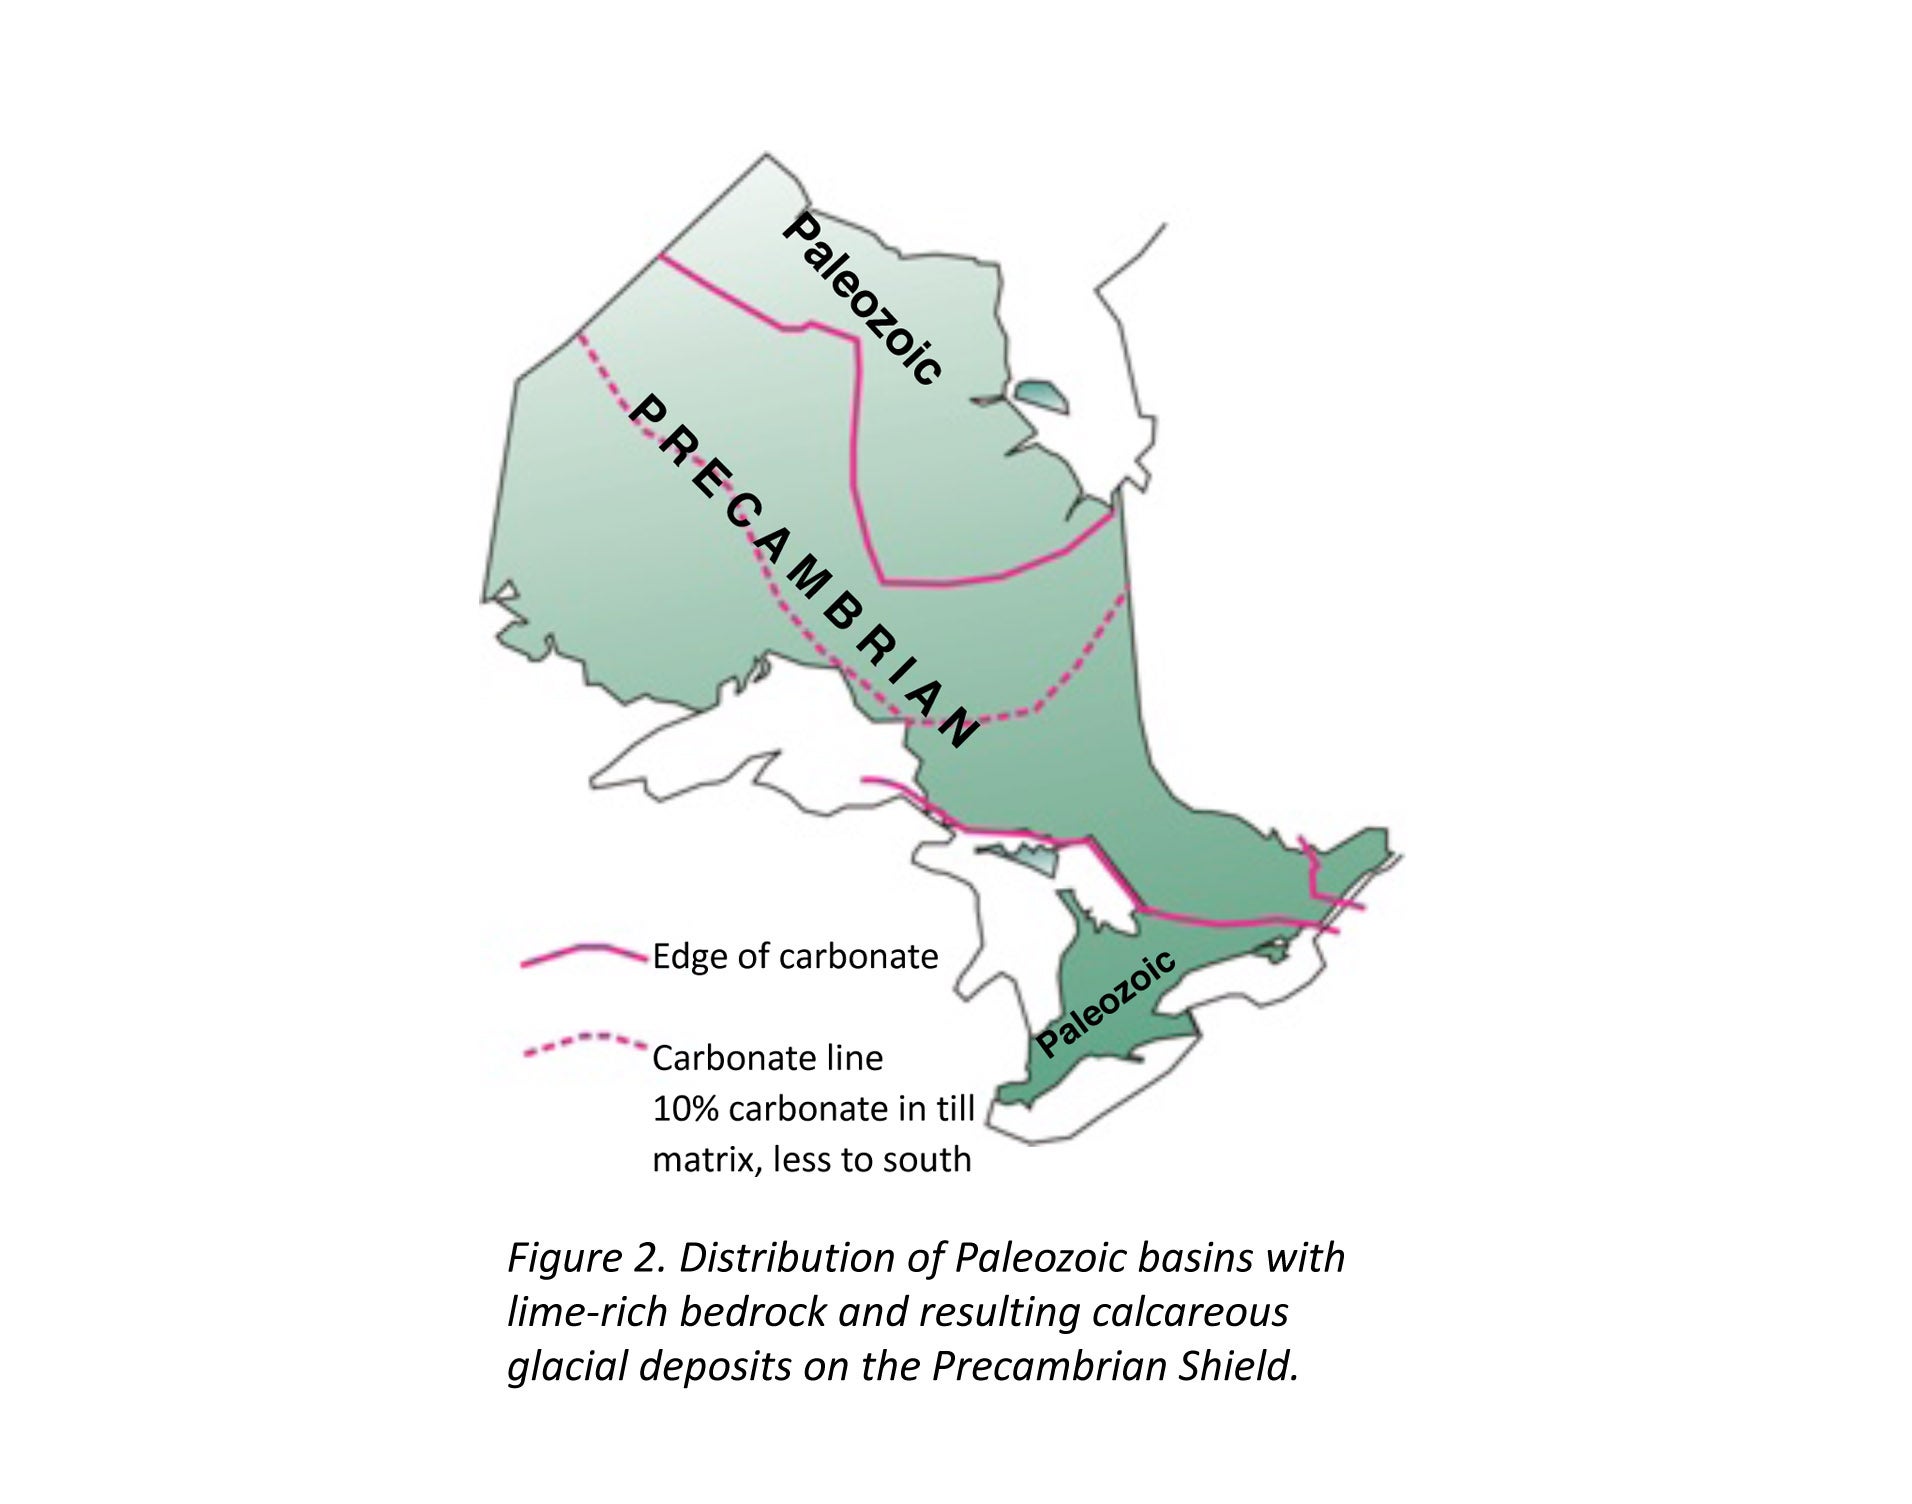 Distribution of Paleozoic basins with lime-rich bedrock and resulting calcareous glacial deposits on the Precambrian Shield.